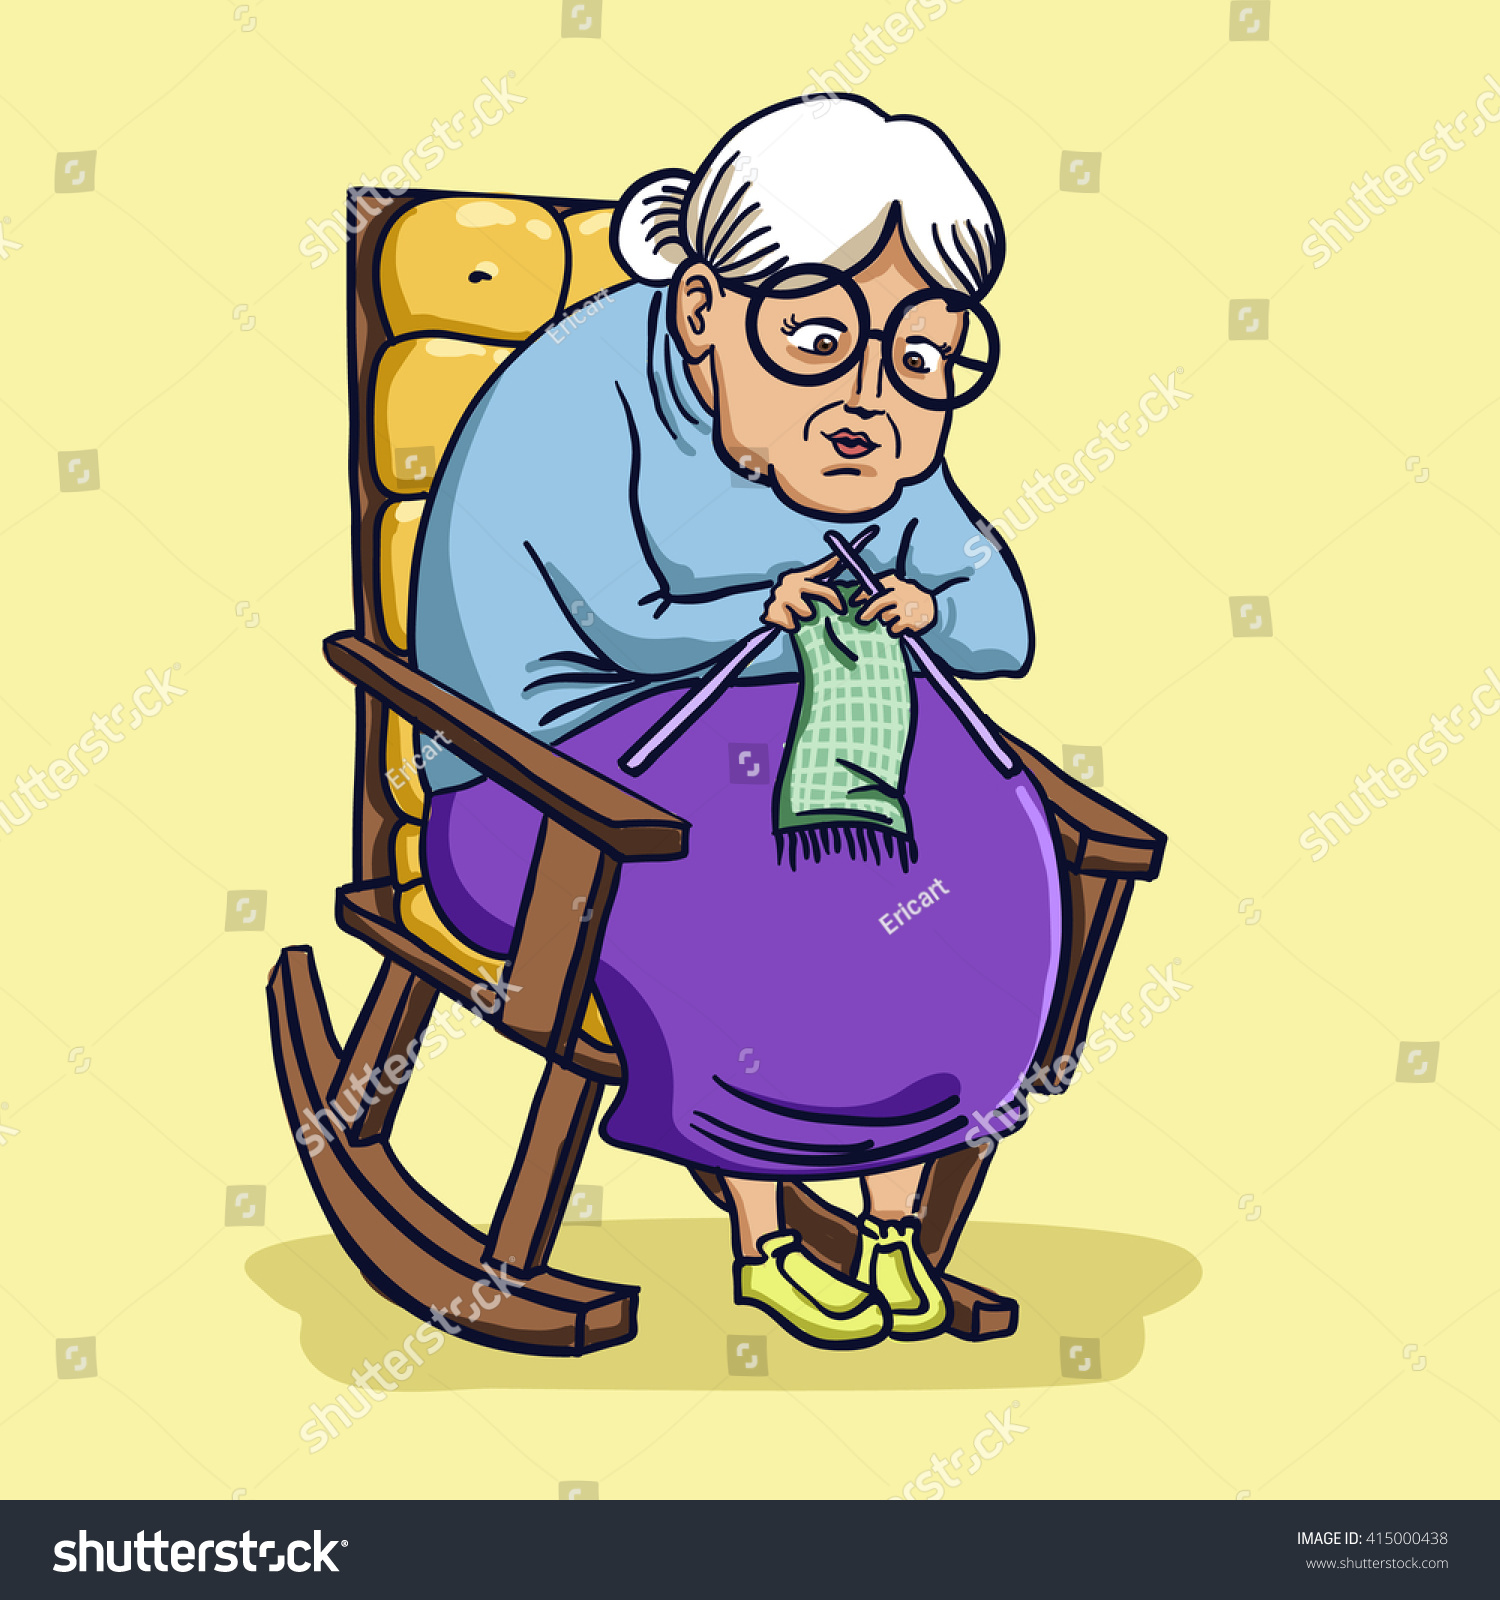 646 Old lady birthday Stock Illustrations, Images & Vectors | Shutterstock